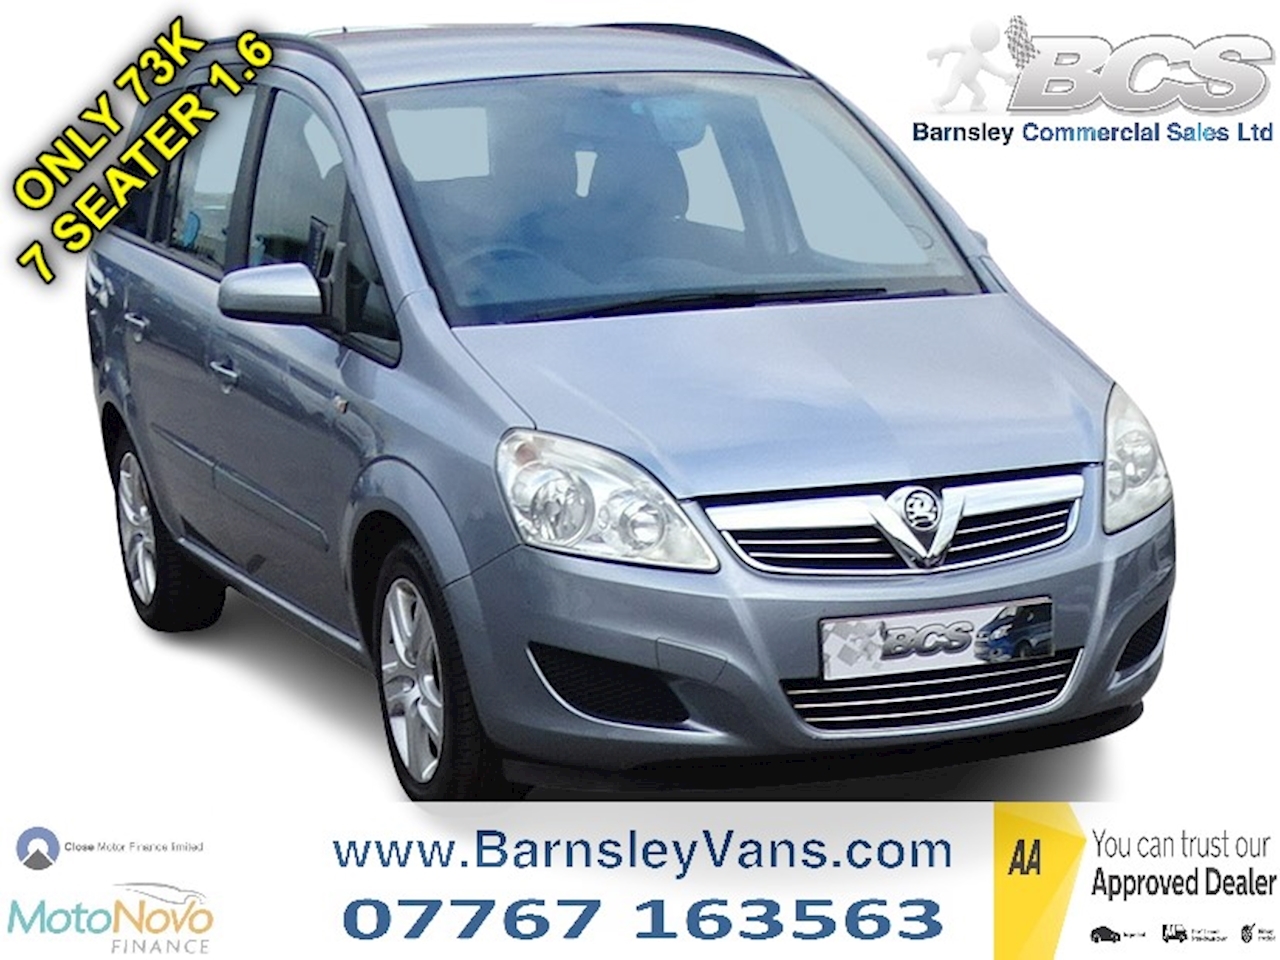 2009 59 VAUXHALL ZAFIRA 1.6 PETROL EXCLUSIV 7 SEATER ONLY 73K